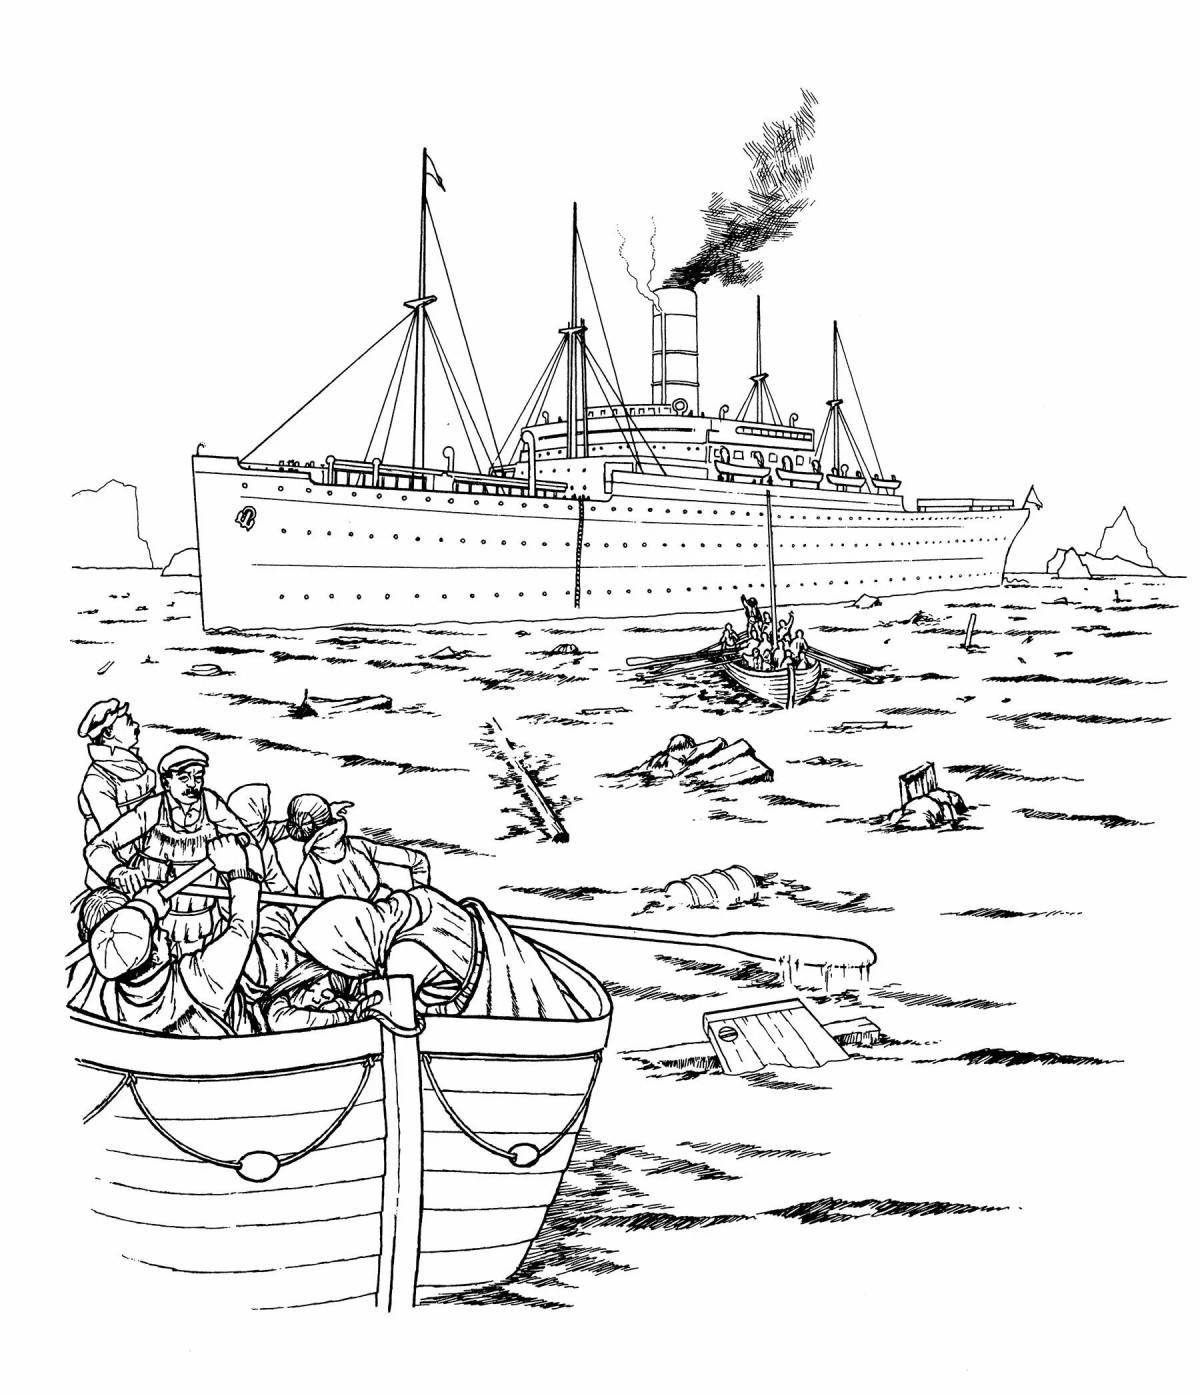 Titanic coloring pages for boys are amazing